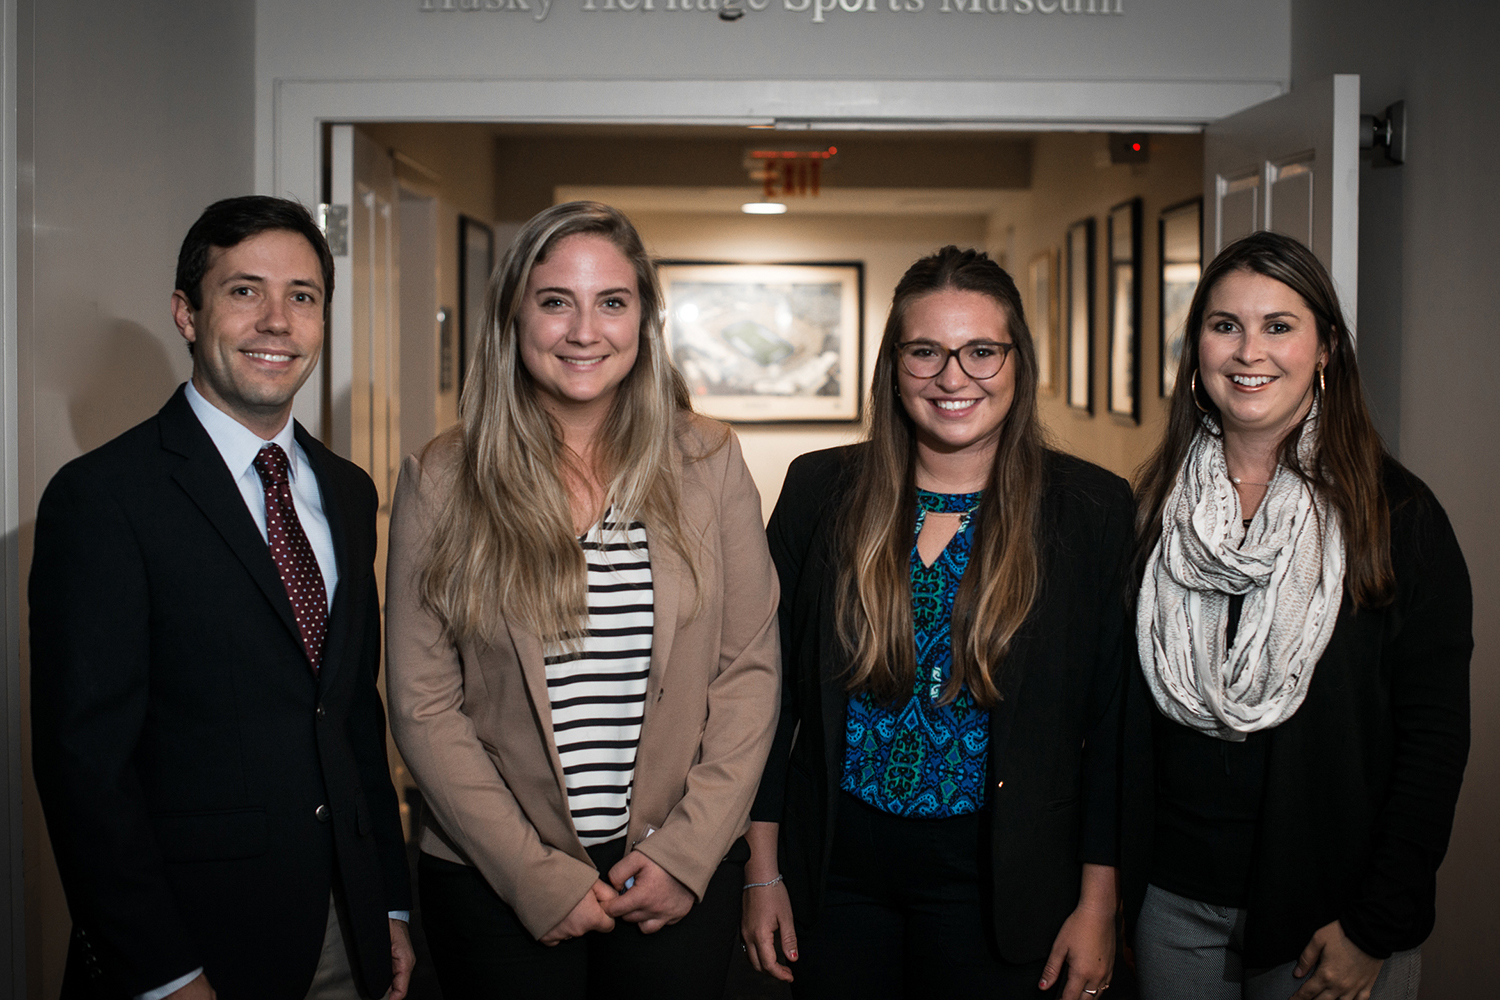 The creators of LambdaVision with two undergraduate student interns who helped represent the company during the CCEI fellowship and again at the Wolff competition. From left, Dr. Jordan Greco '10 (CLAS), '15 Ph.D., Molly Zgoda '17 (CLAS), Audrey Gallo '17 (CLAS), and Dr. Nicole Wagner '07 (CLAS), '13 Ph.D. (Nathan Oldham/UConn photo)